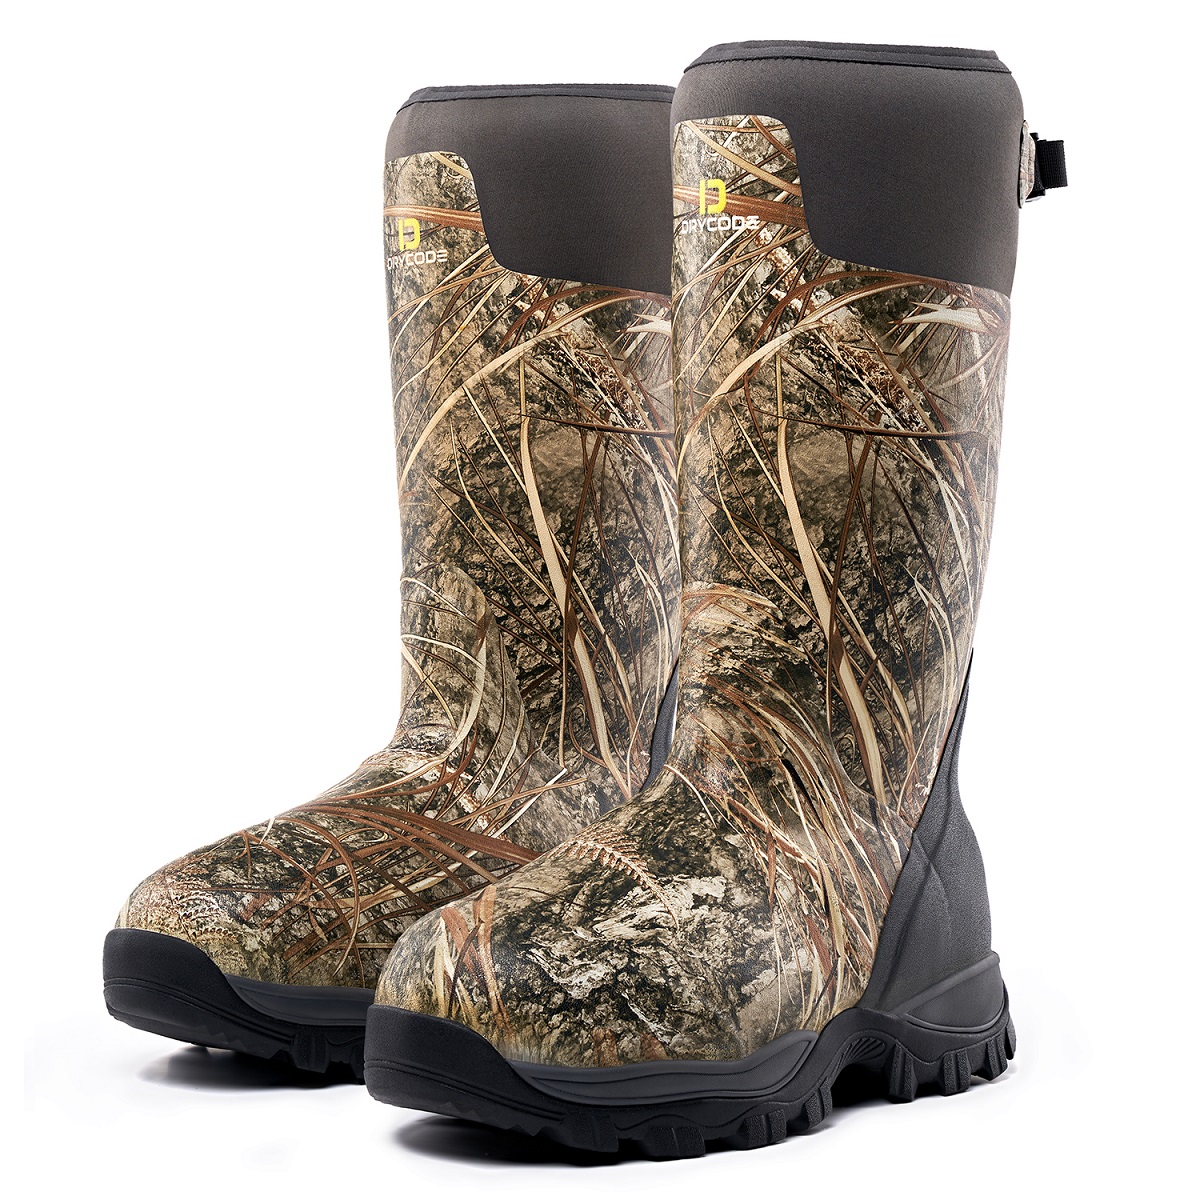 DRYCODE Camo Hunting Boots (Real Reed) for Men&Women, Warm Hunting Hiking Boots